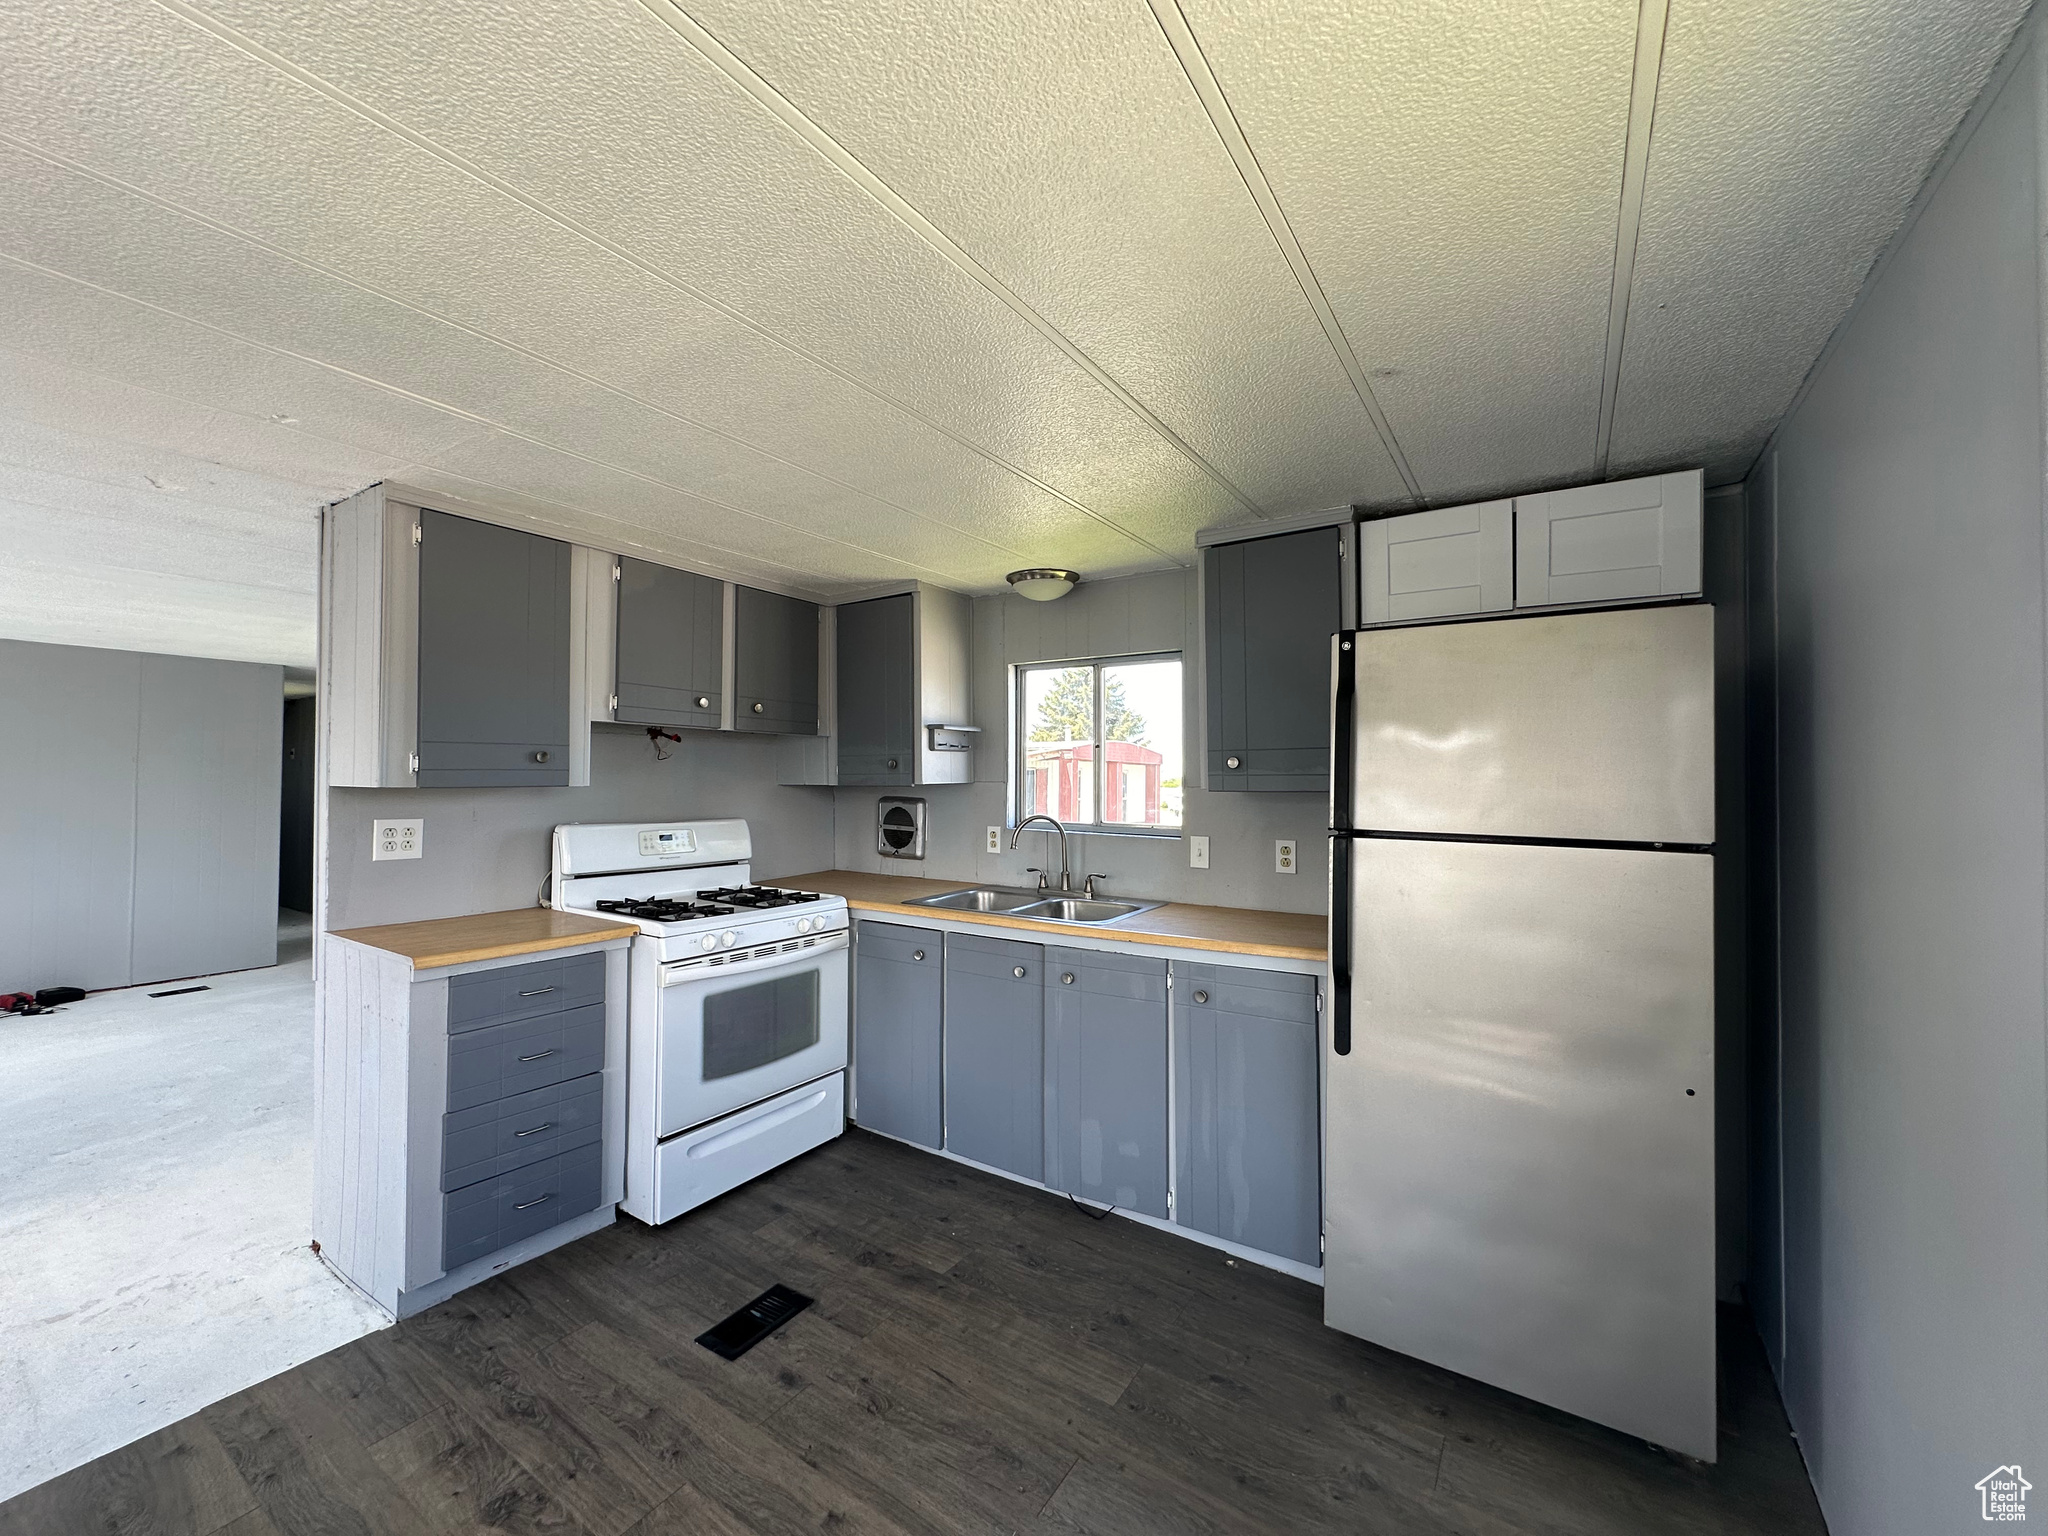 Kitchen featuring stainless steel refrigerator, white gas stove, dark hardwood / wood-style floors, gray cabinets, and sink